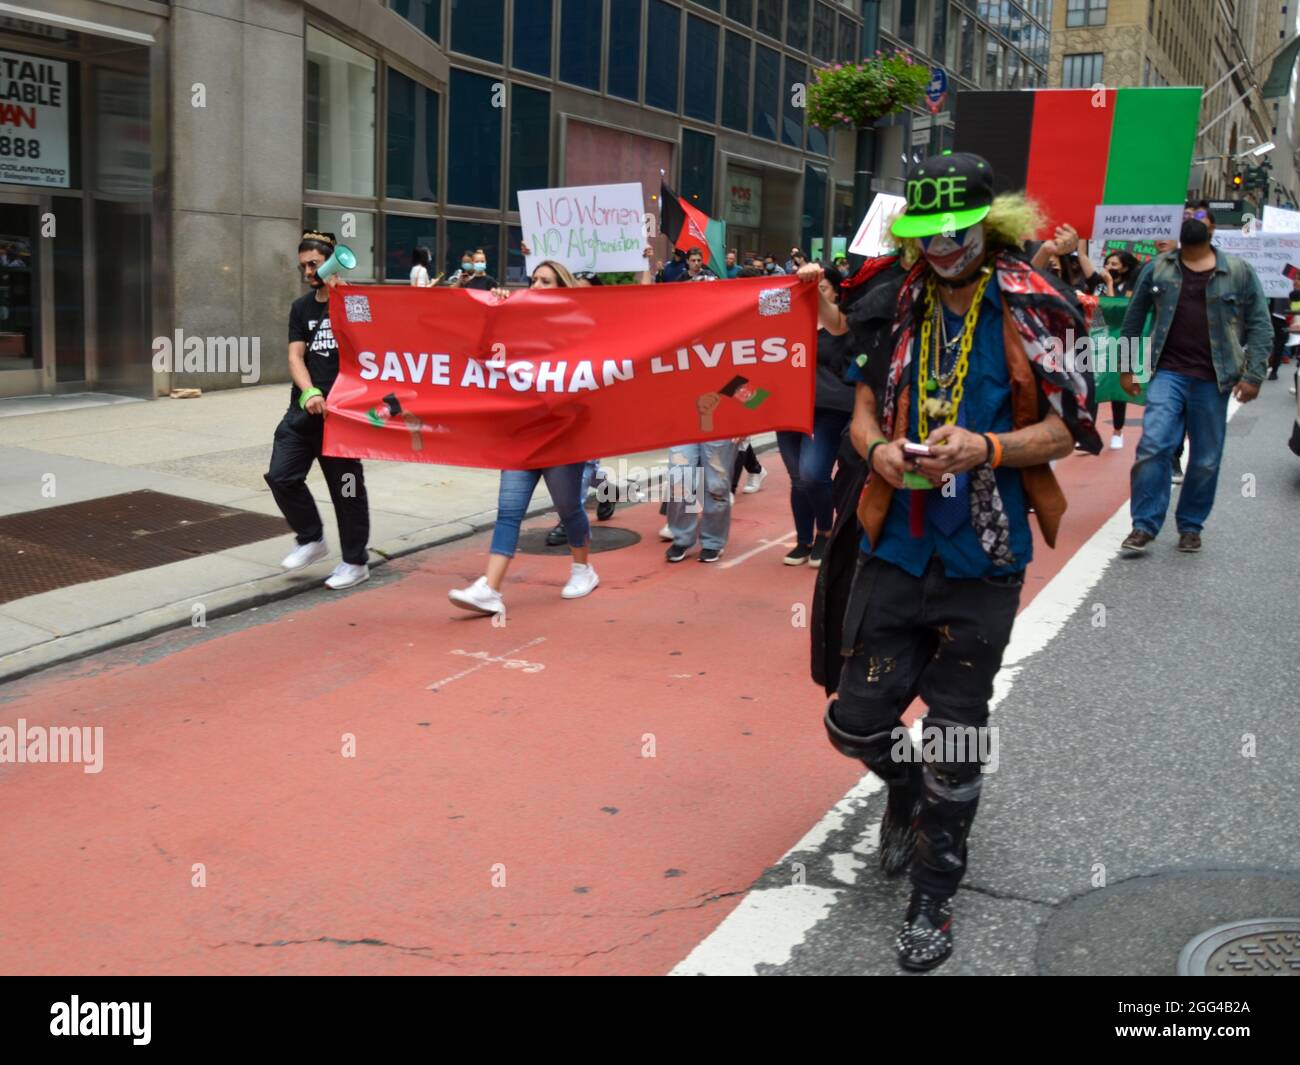 Hundreds gathered at Bryant Park and marched to the United Nations during the Stop Killing Afghans demonstration in New York City. Stock Photo